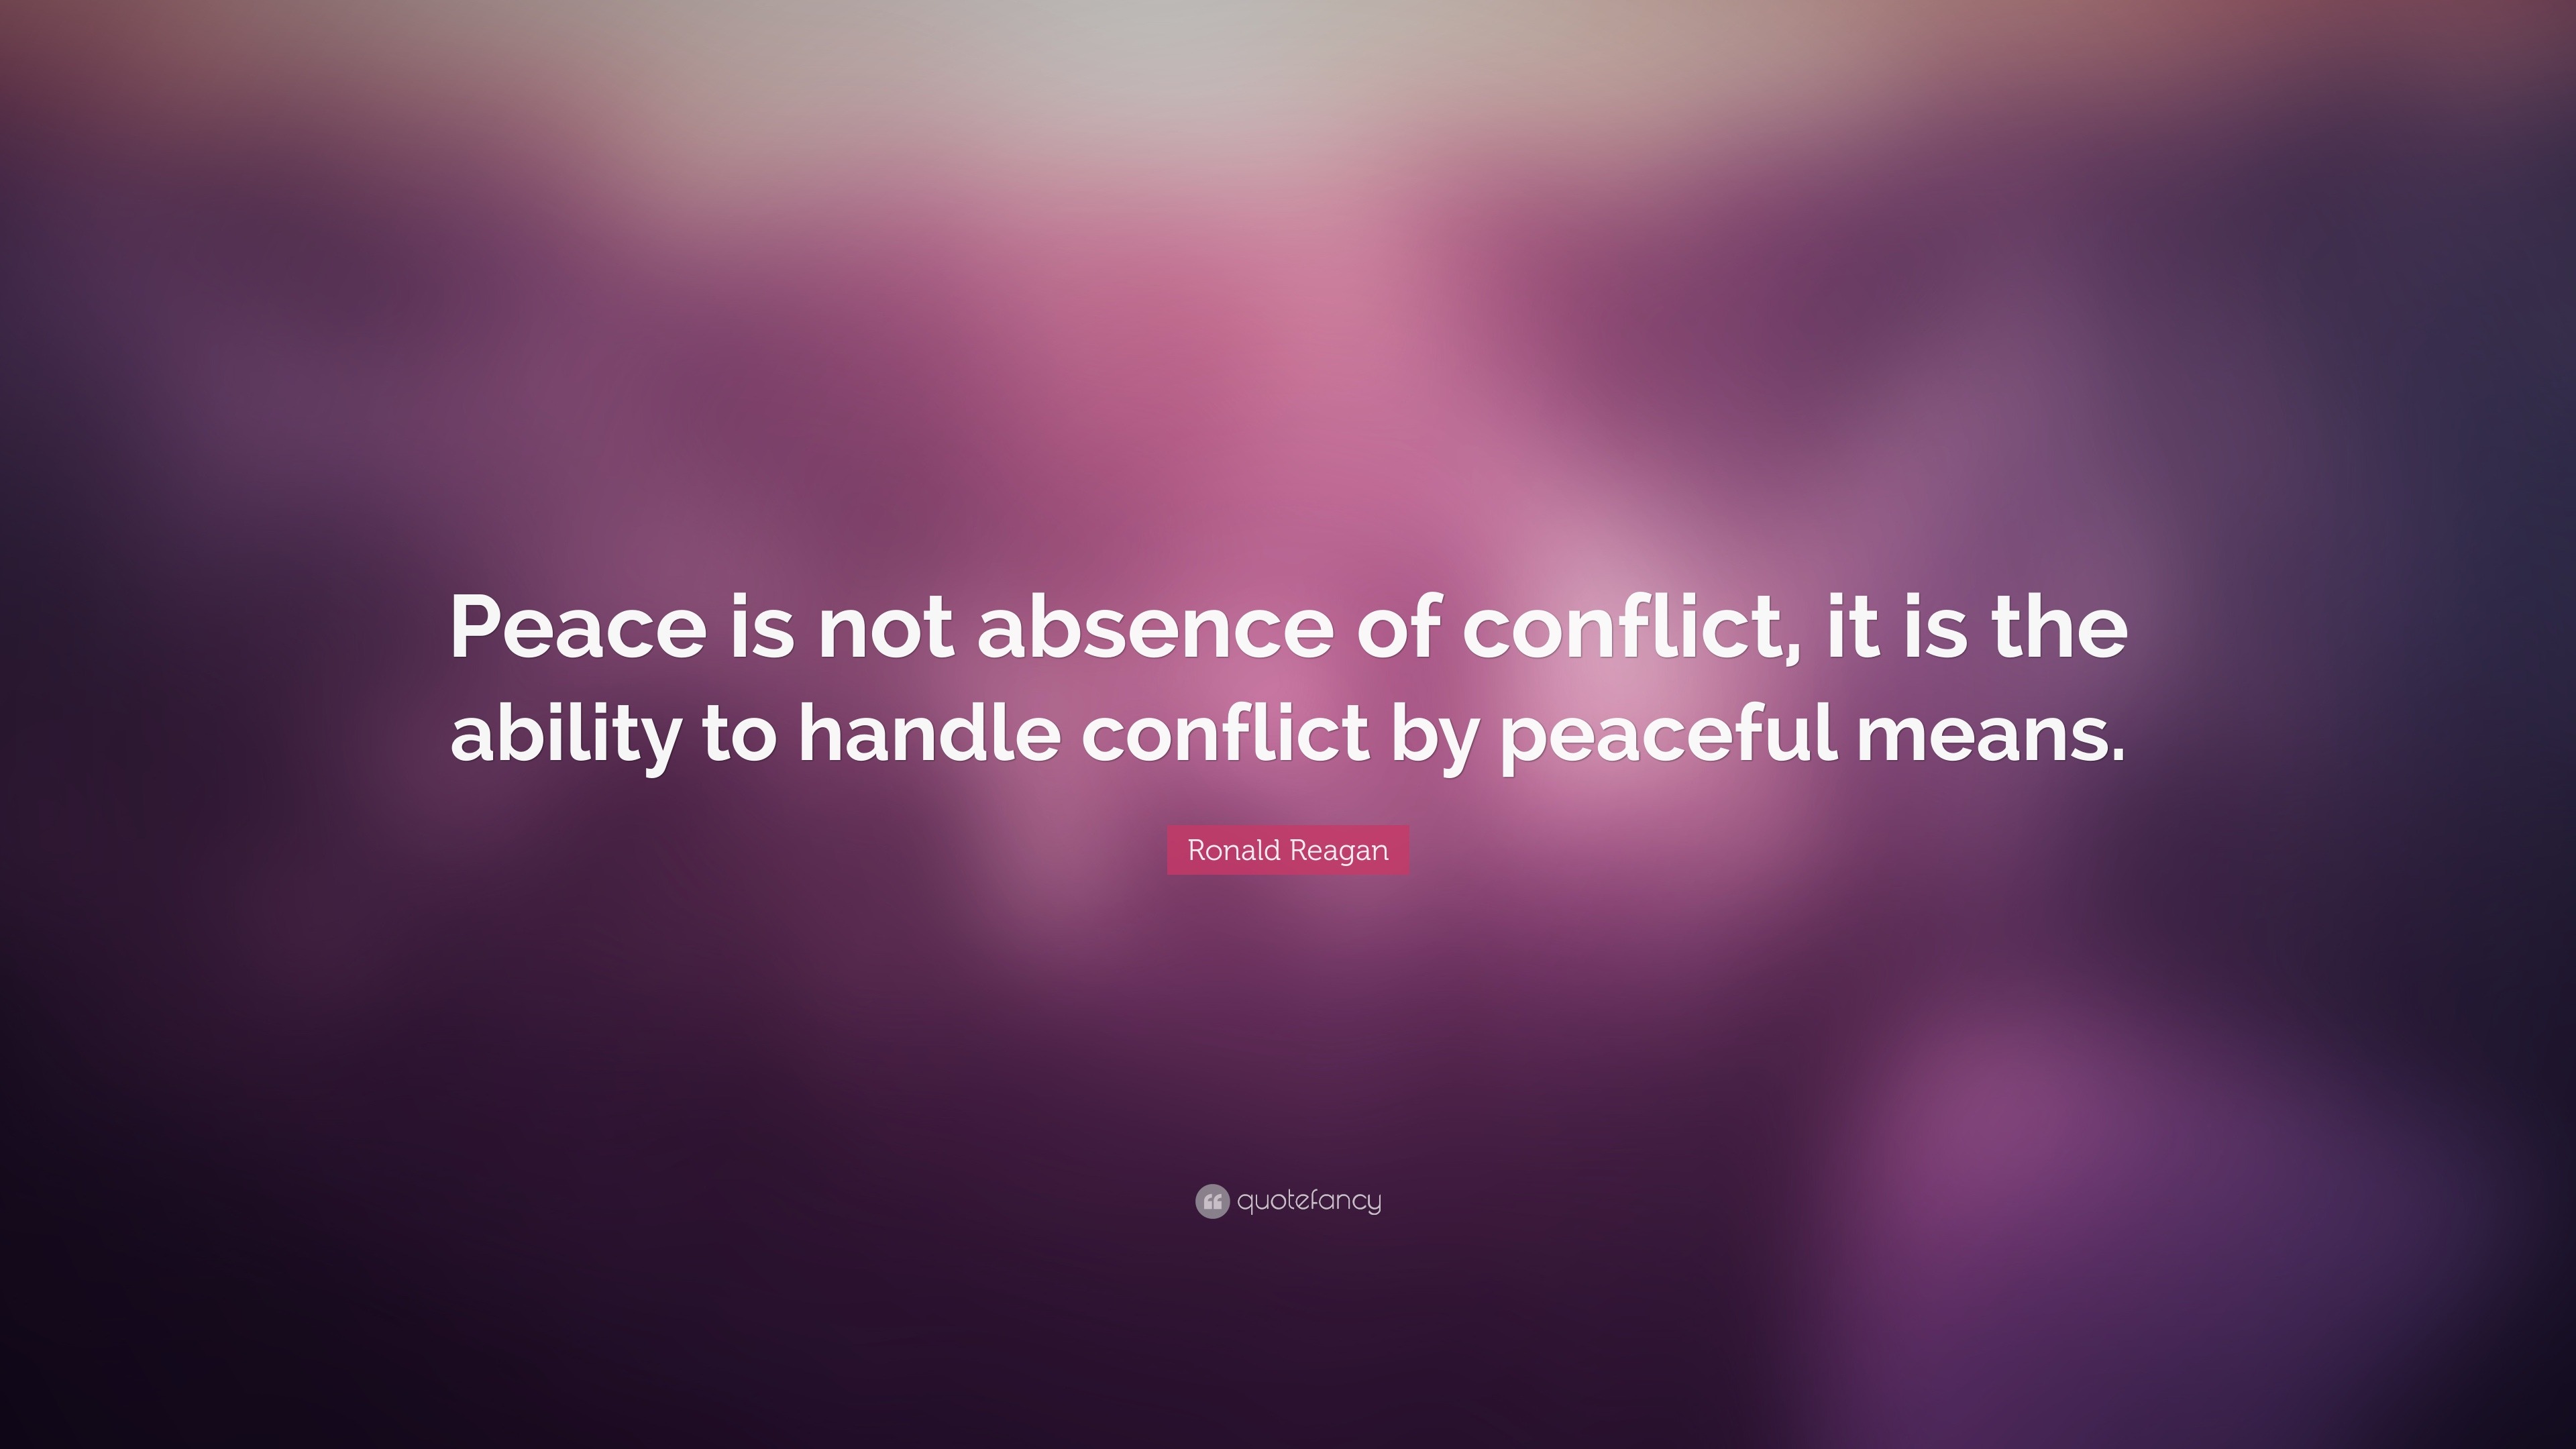 quotes about resolving conflict peacefully